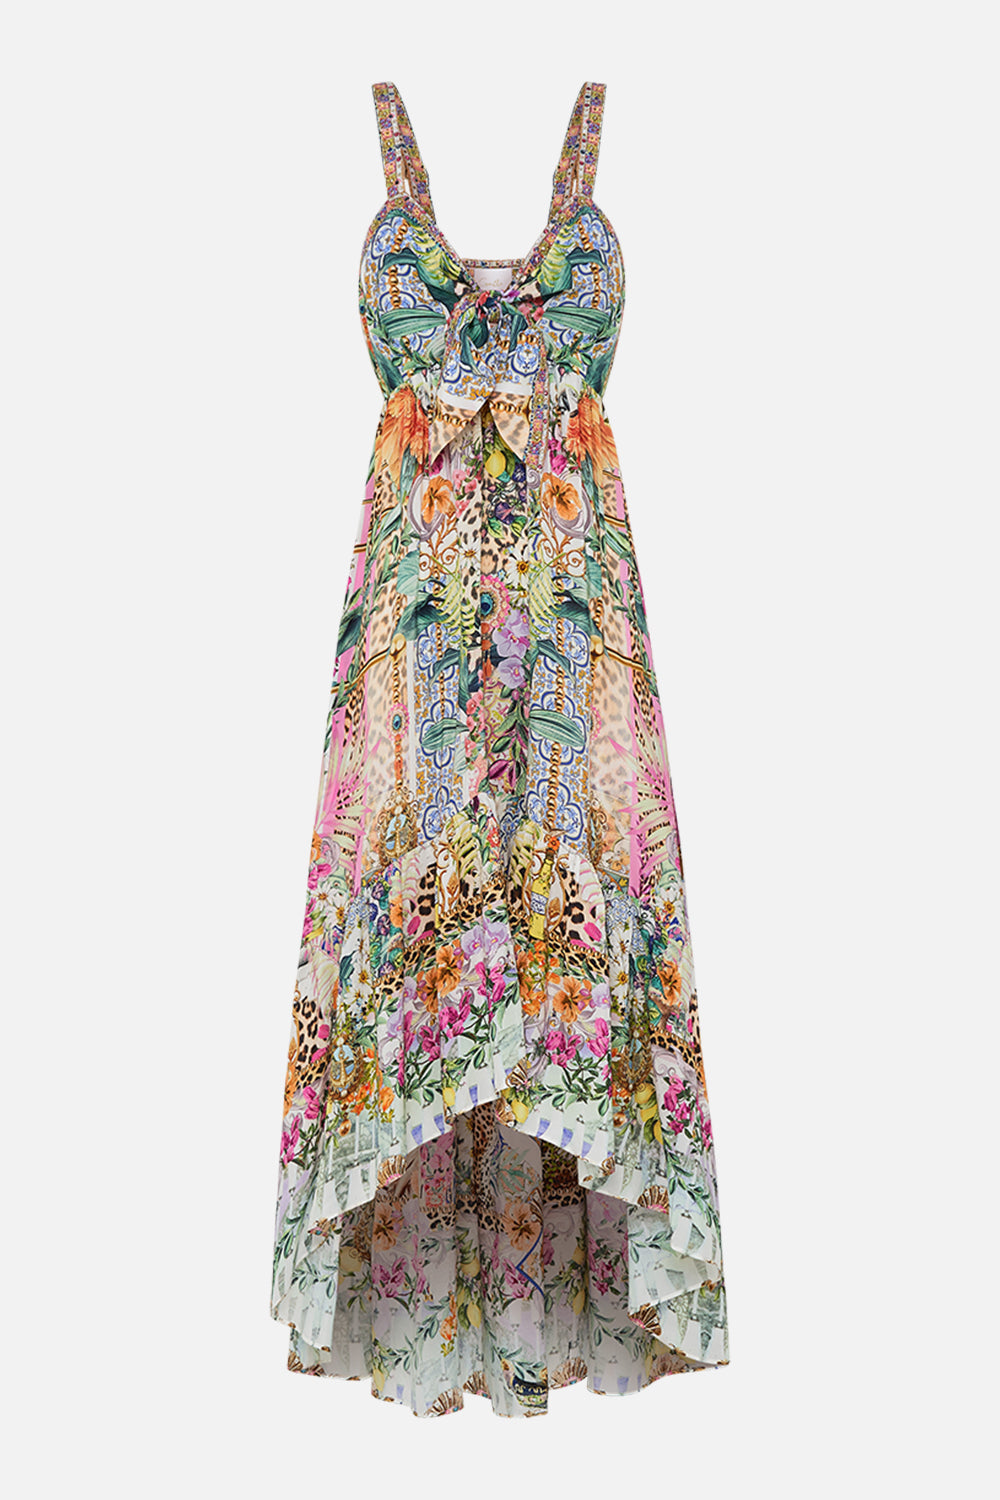 Product view of CAMILLA floral silk dress in Flowers Of Neptune print